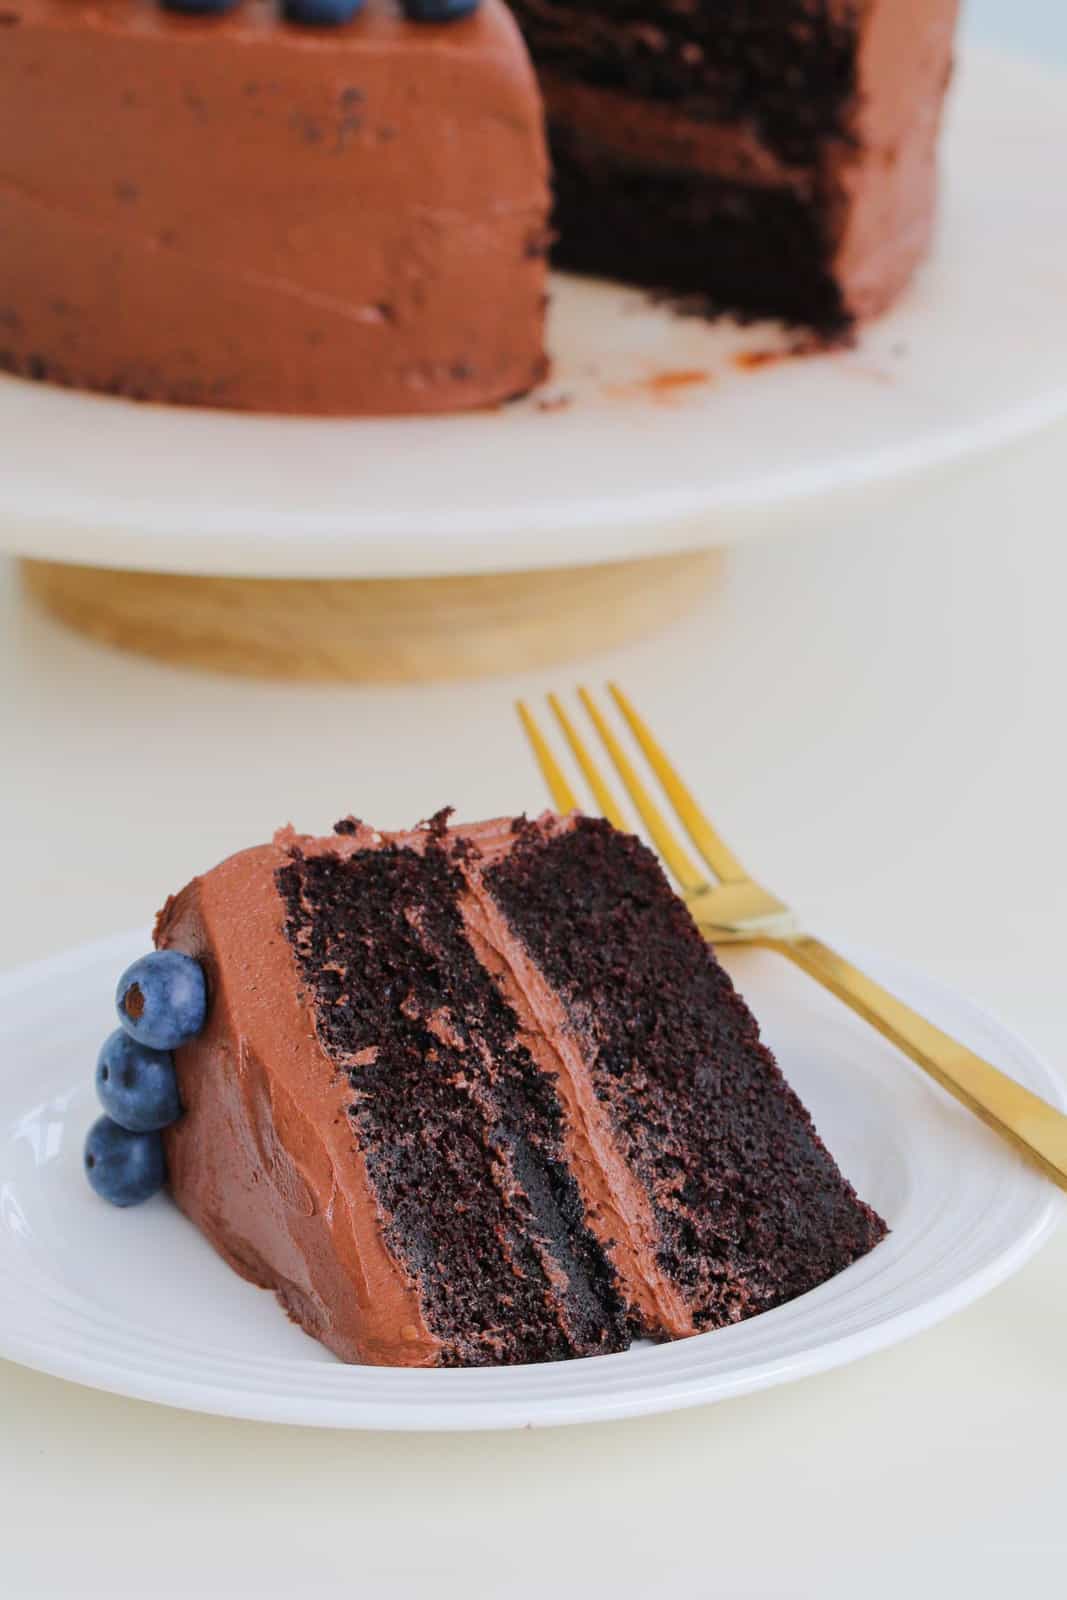 A slice of rich mud layered cake with chocolate frosting and blueberries on a white plate with a gold fork.